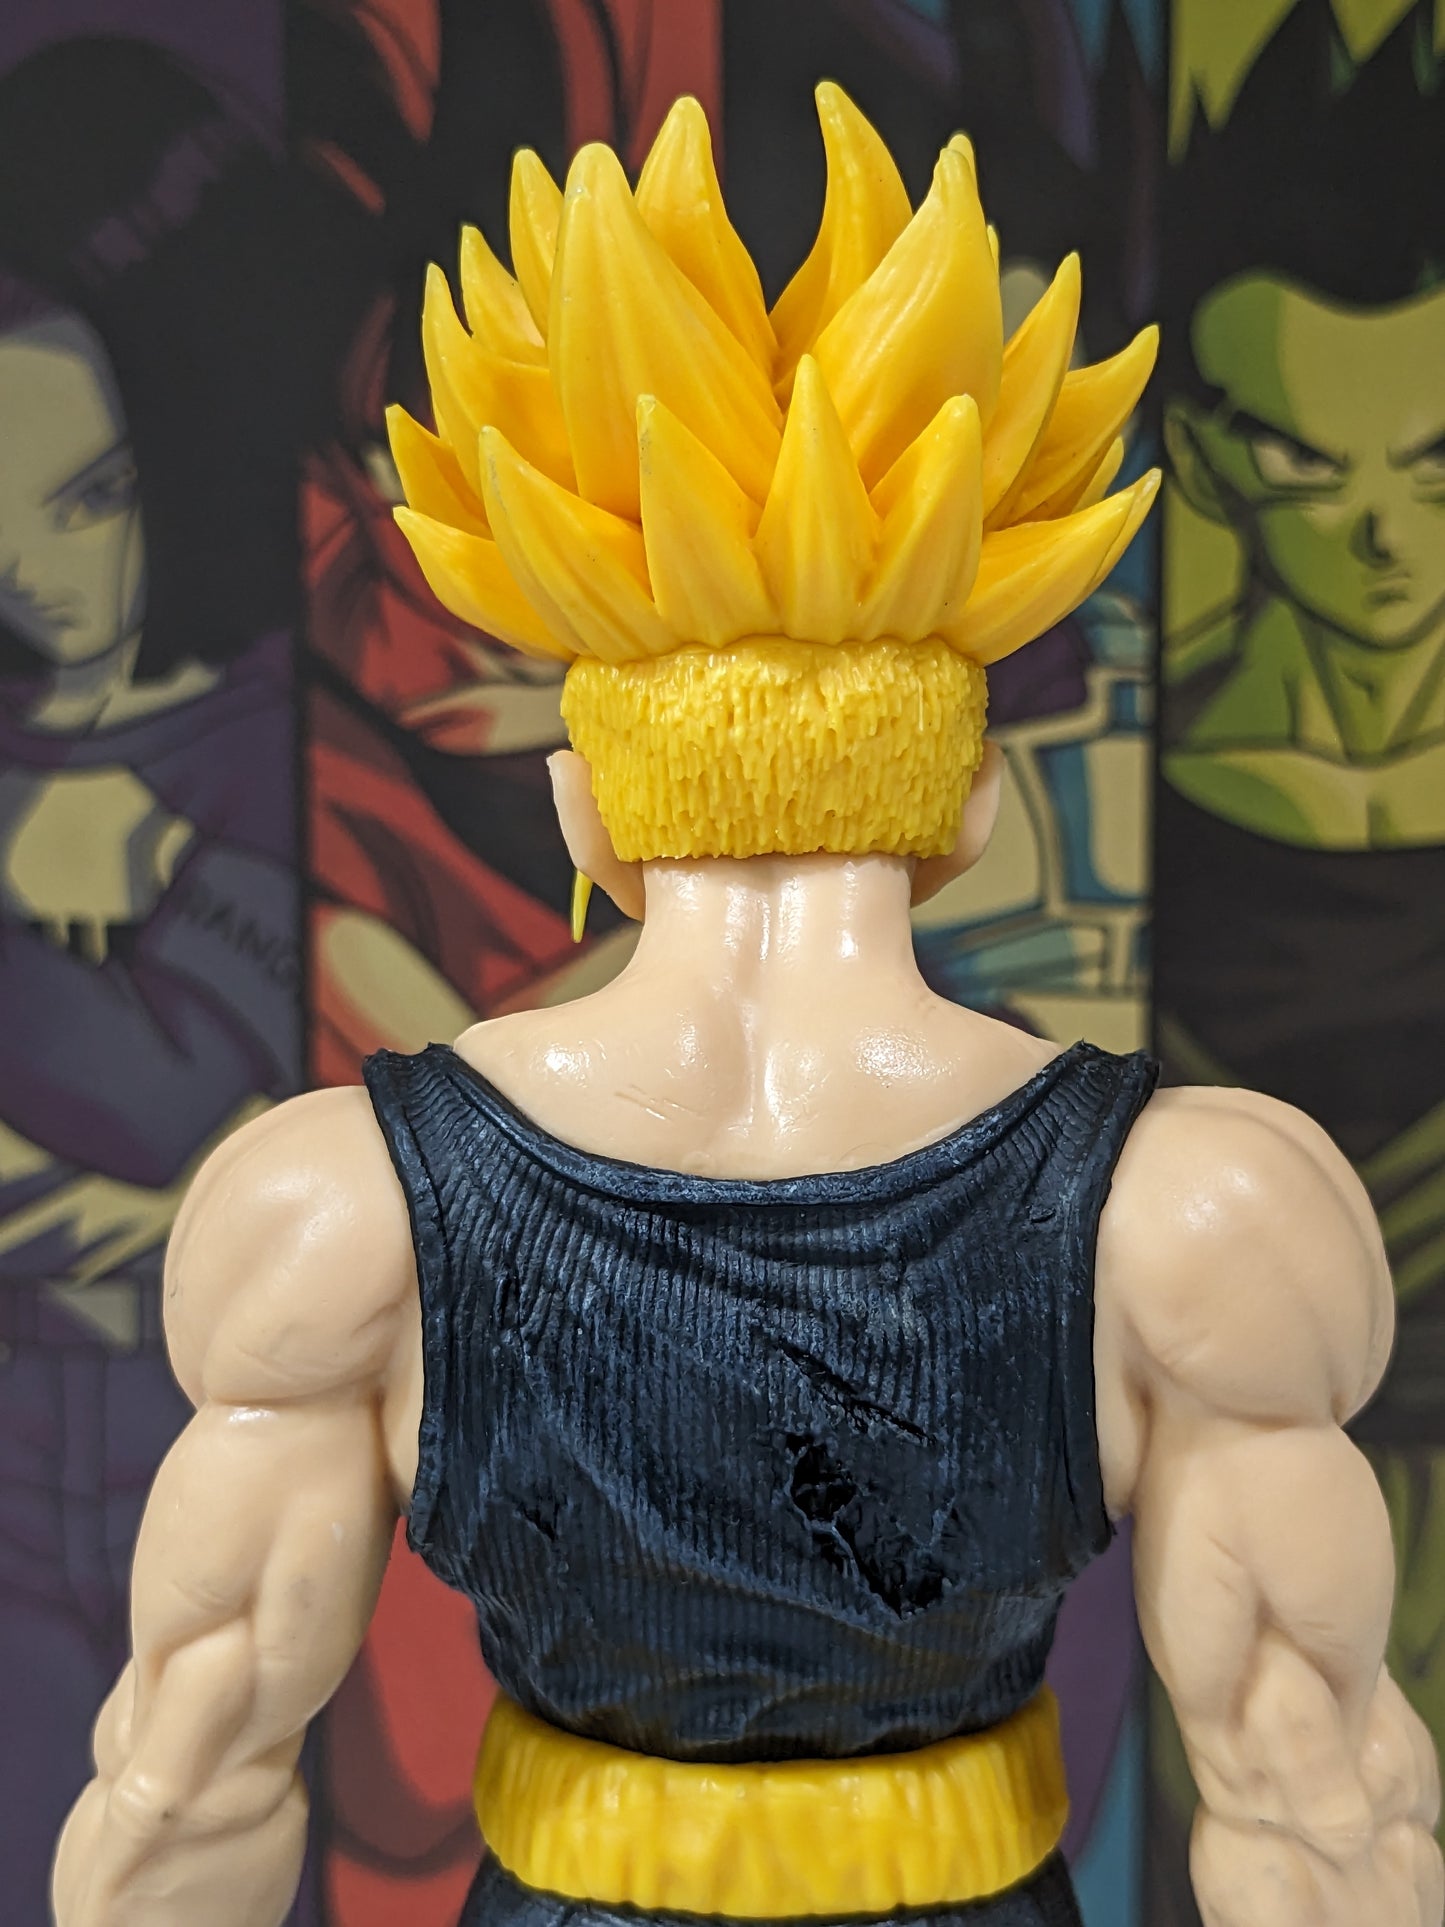 Dragon BallZ 30 cm Super Saiyan Trunks Action Figure, High Quality PVC Collectible, Home Decorative Statue, Amazing Gift for DBZ Lovers